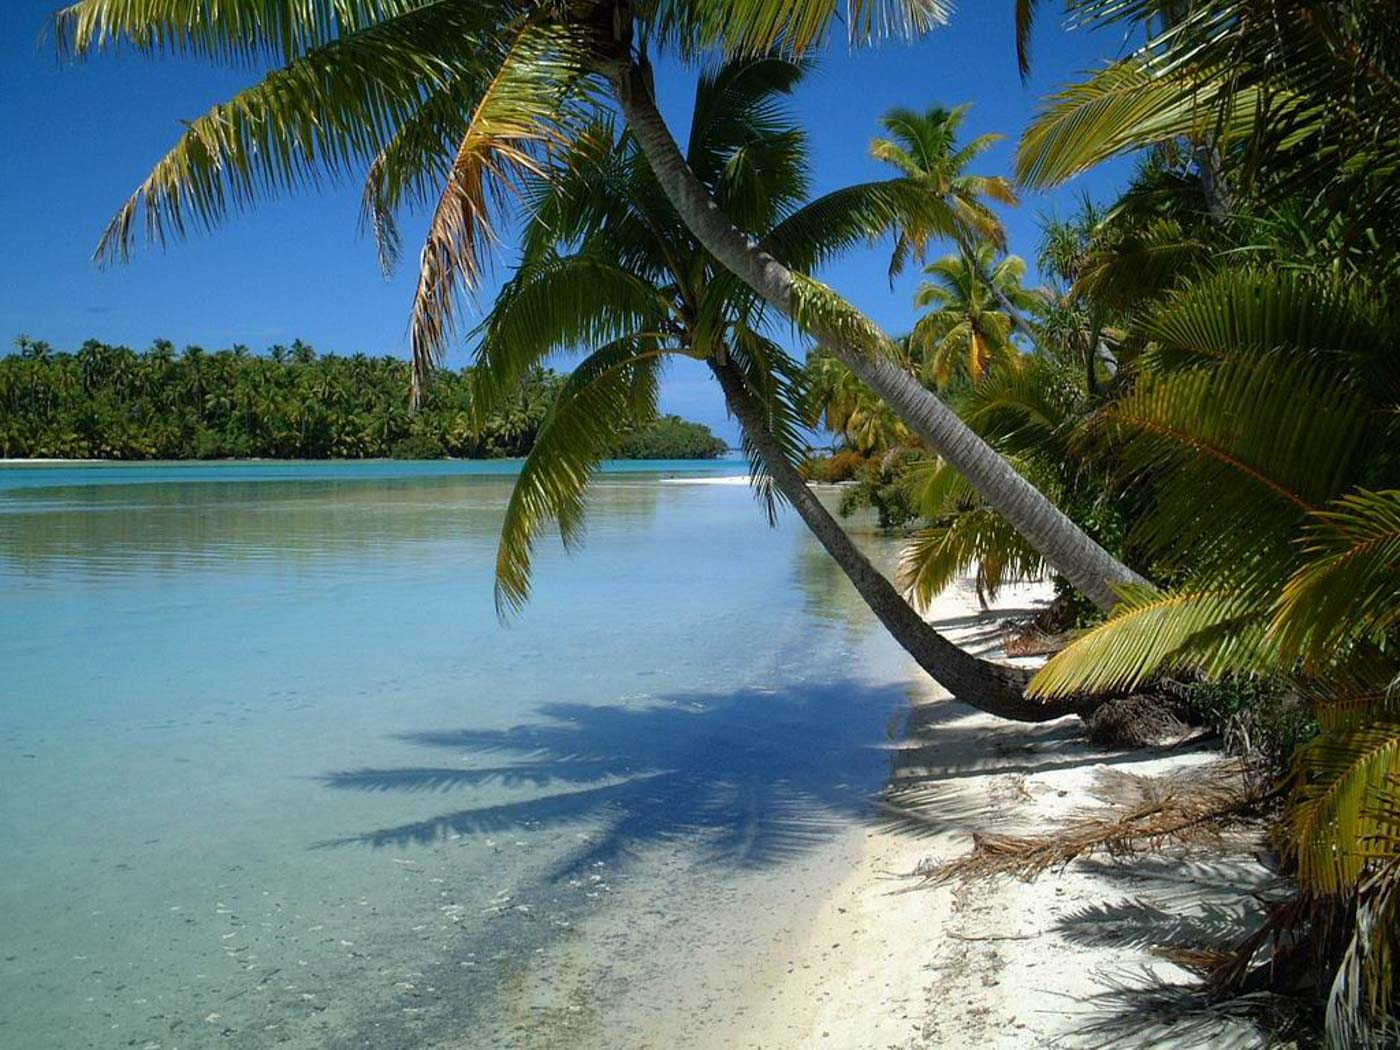 TRAVEL BAN DUE TO CORONAVIRUS. Tapuaetai or One Foot Island is part of Cook Islands, an island country in the South Pacific Ocean. Photo courtesy of Wikipedia 